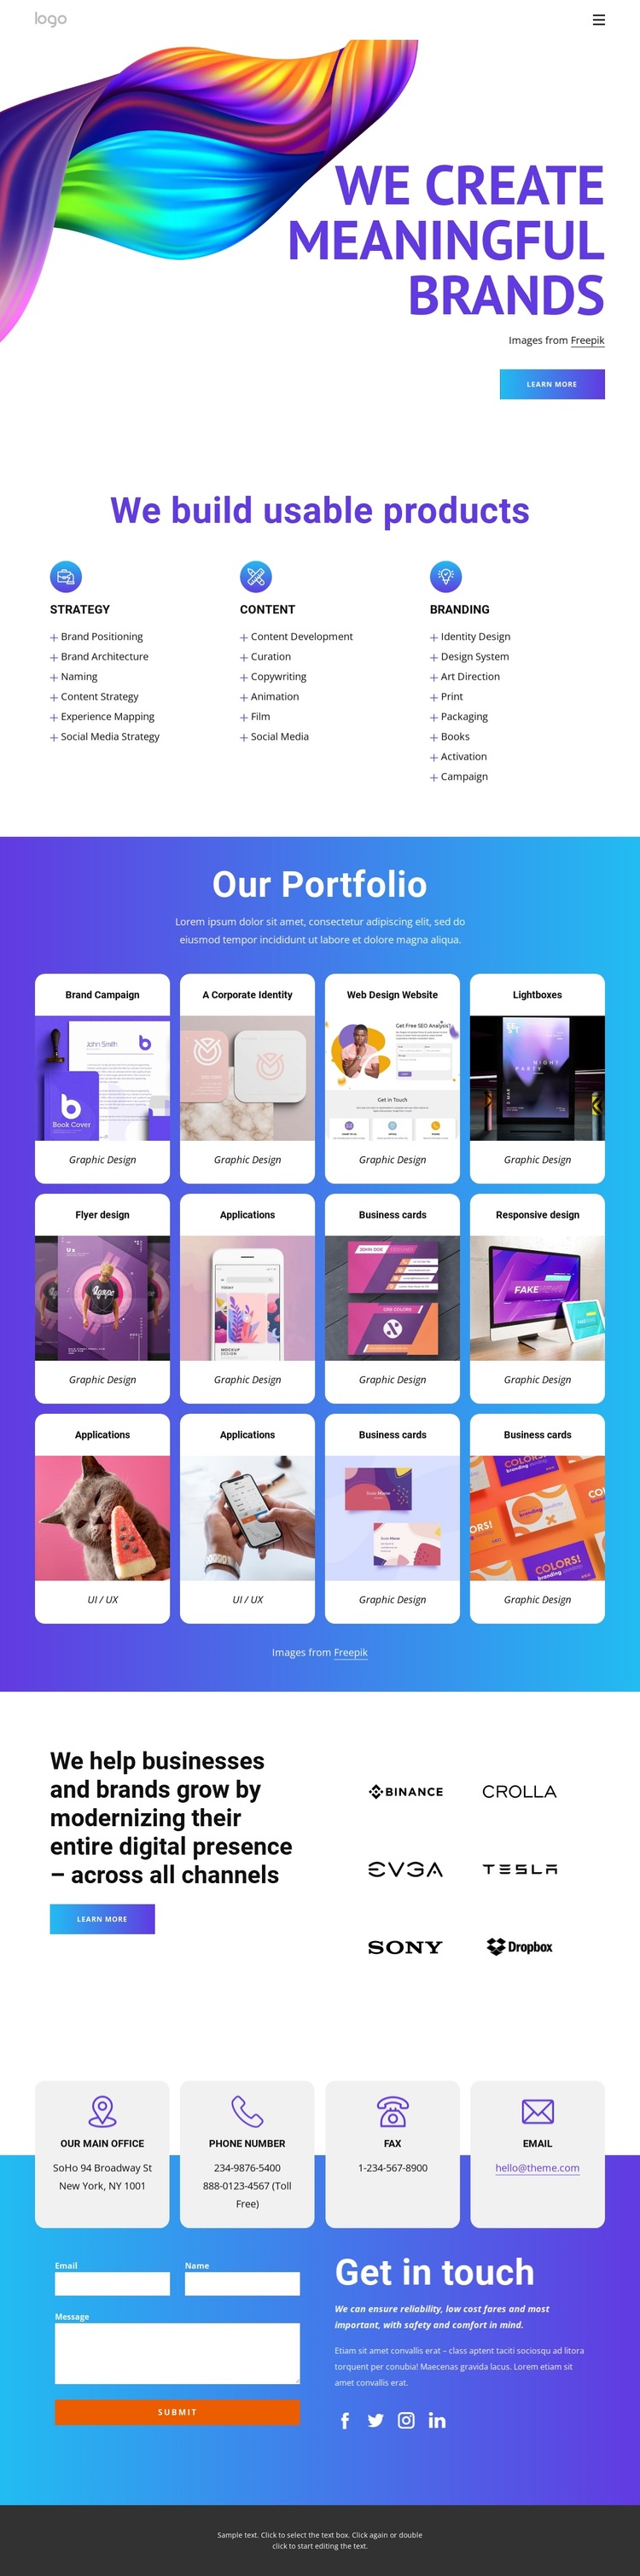 We create meaningful brands HTML5 Template